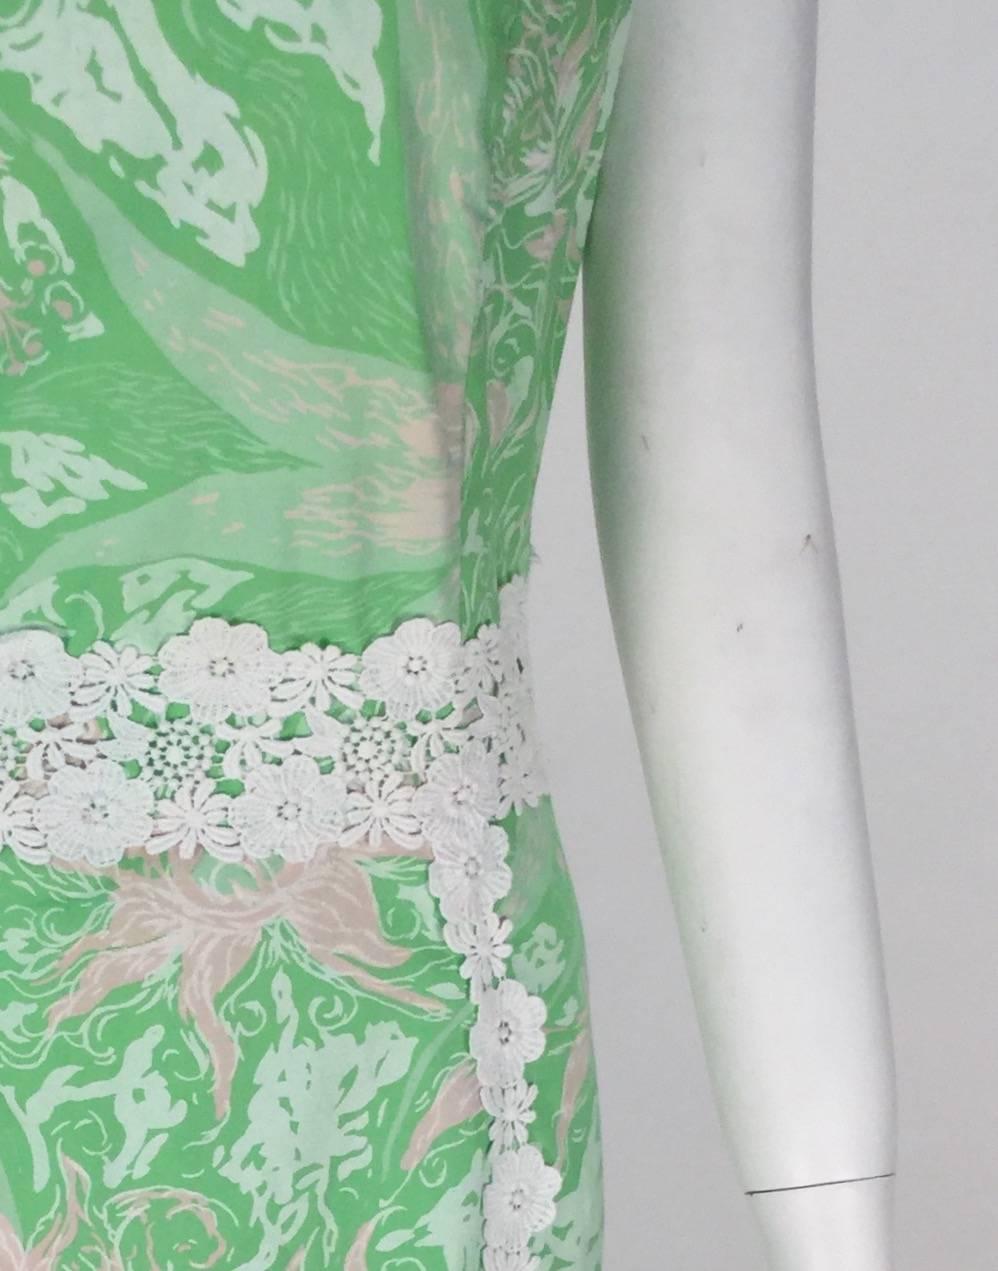 
Fantastic 1960's cotton green floral print with floral lace trim shift dress by Shifts Internationale of Miami. Not as well known as, Miami made Lilly Pulitzer designs of the same era, Shifts Internationale Designs were also from Miami, extremely